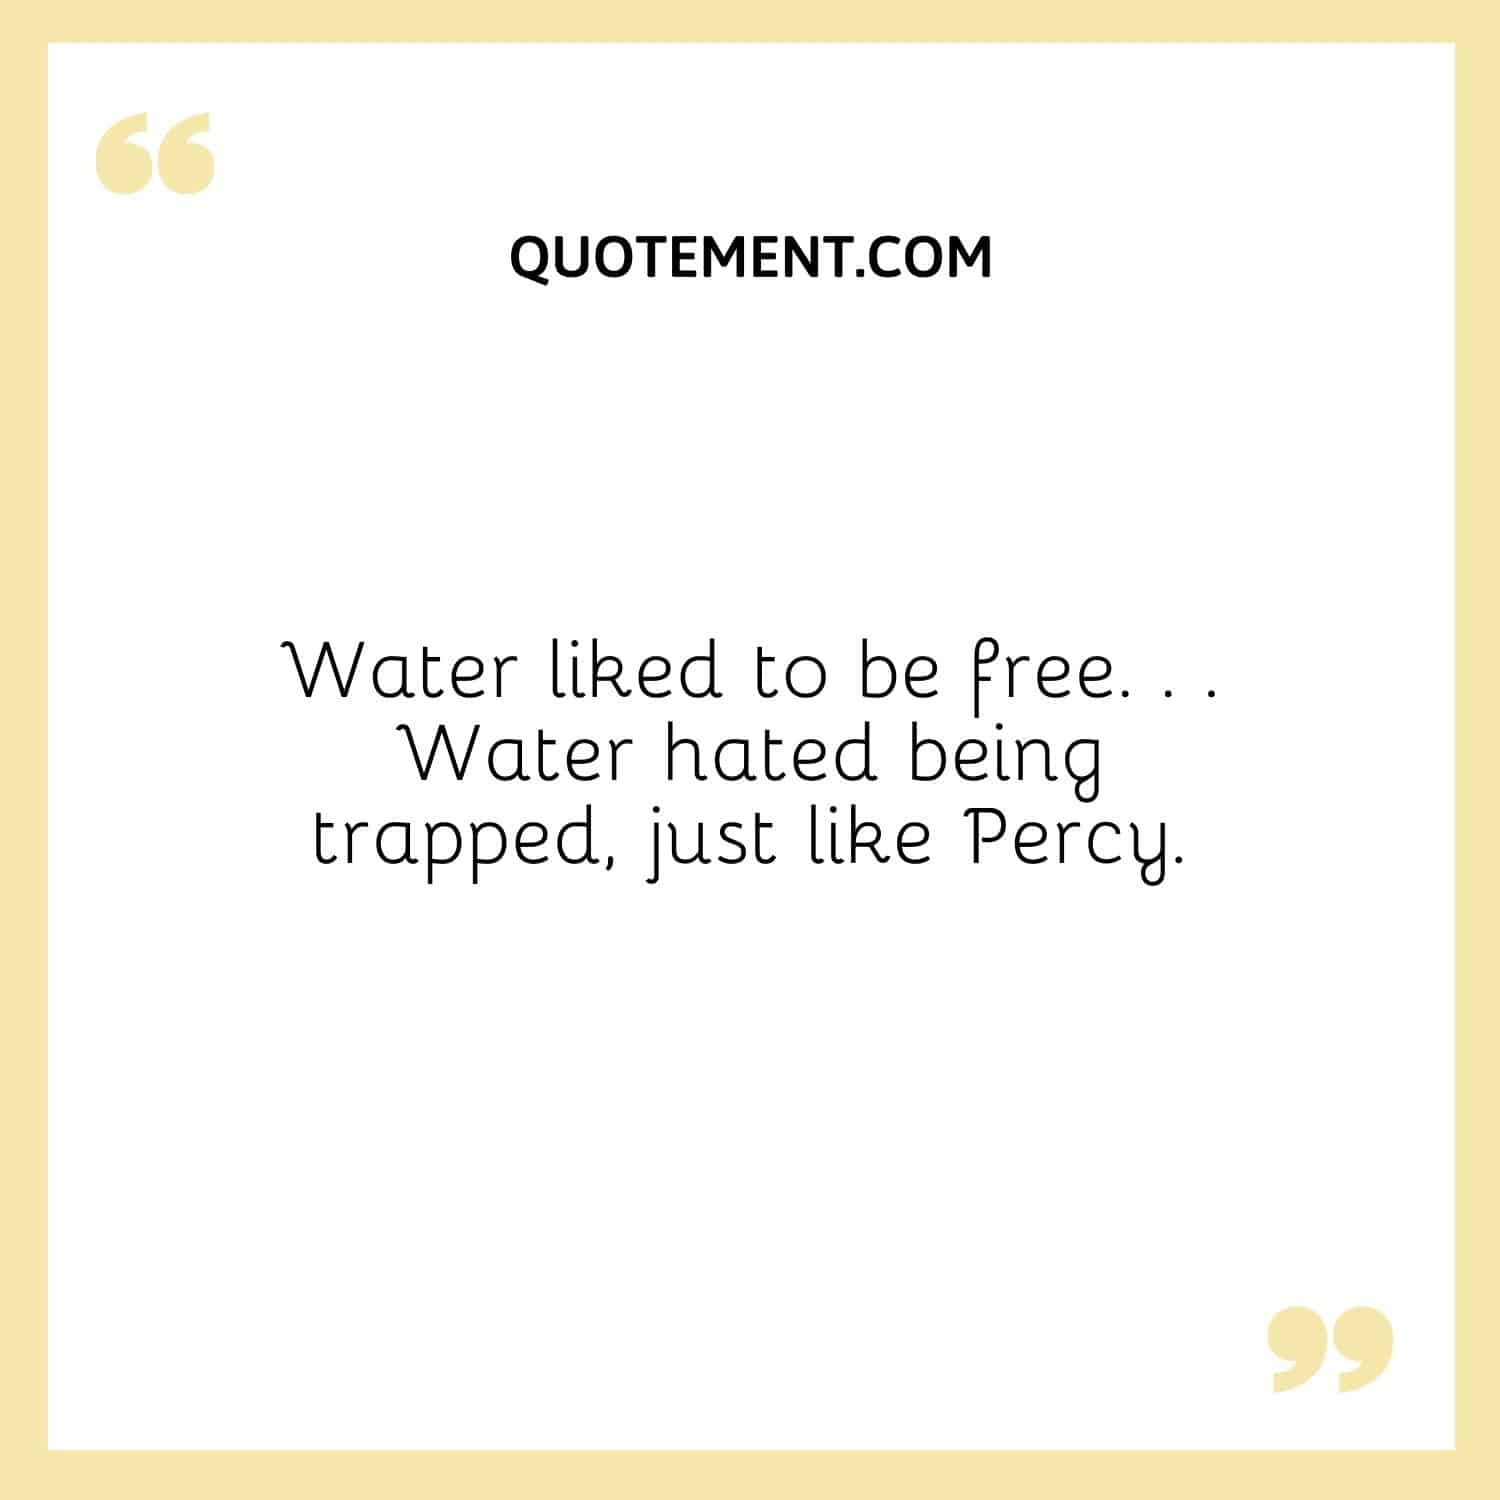 Water liked to be free